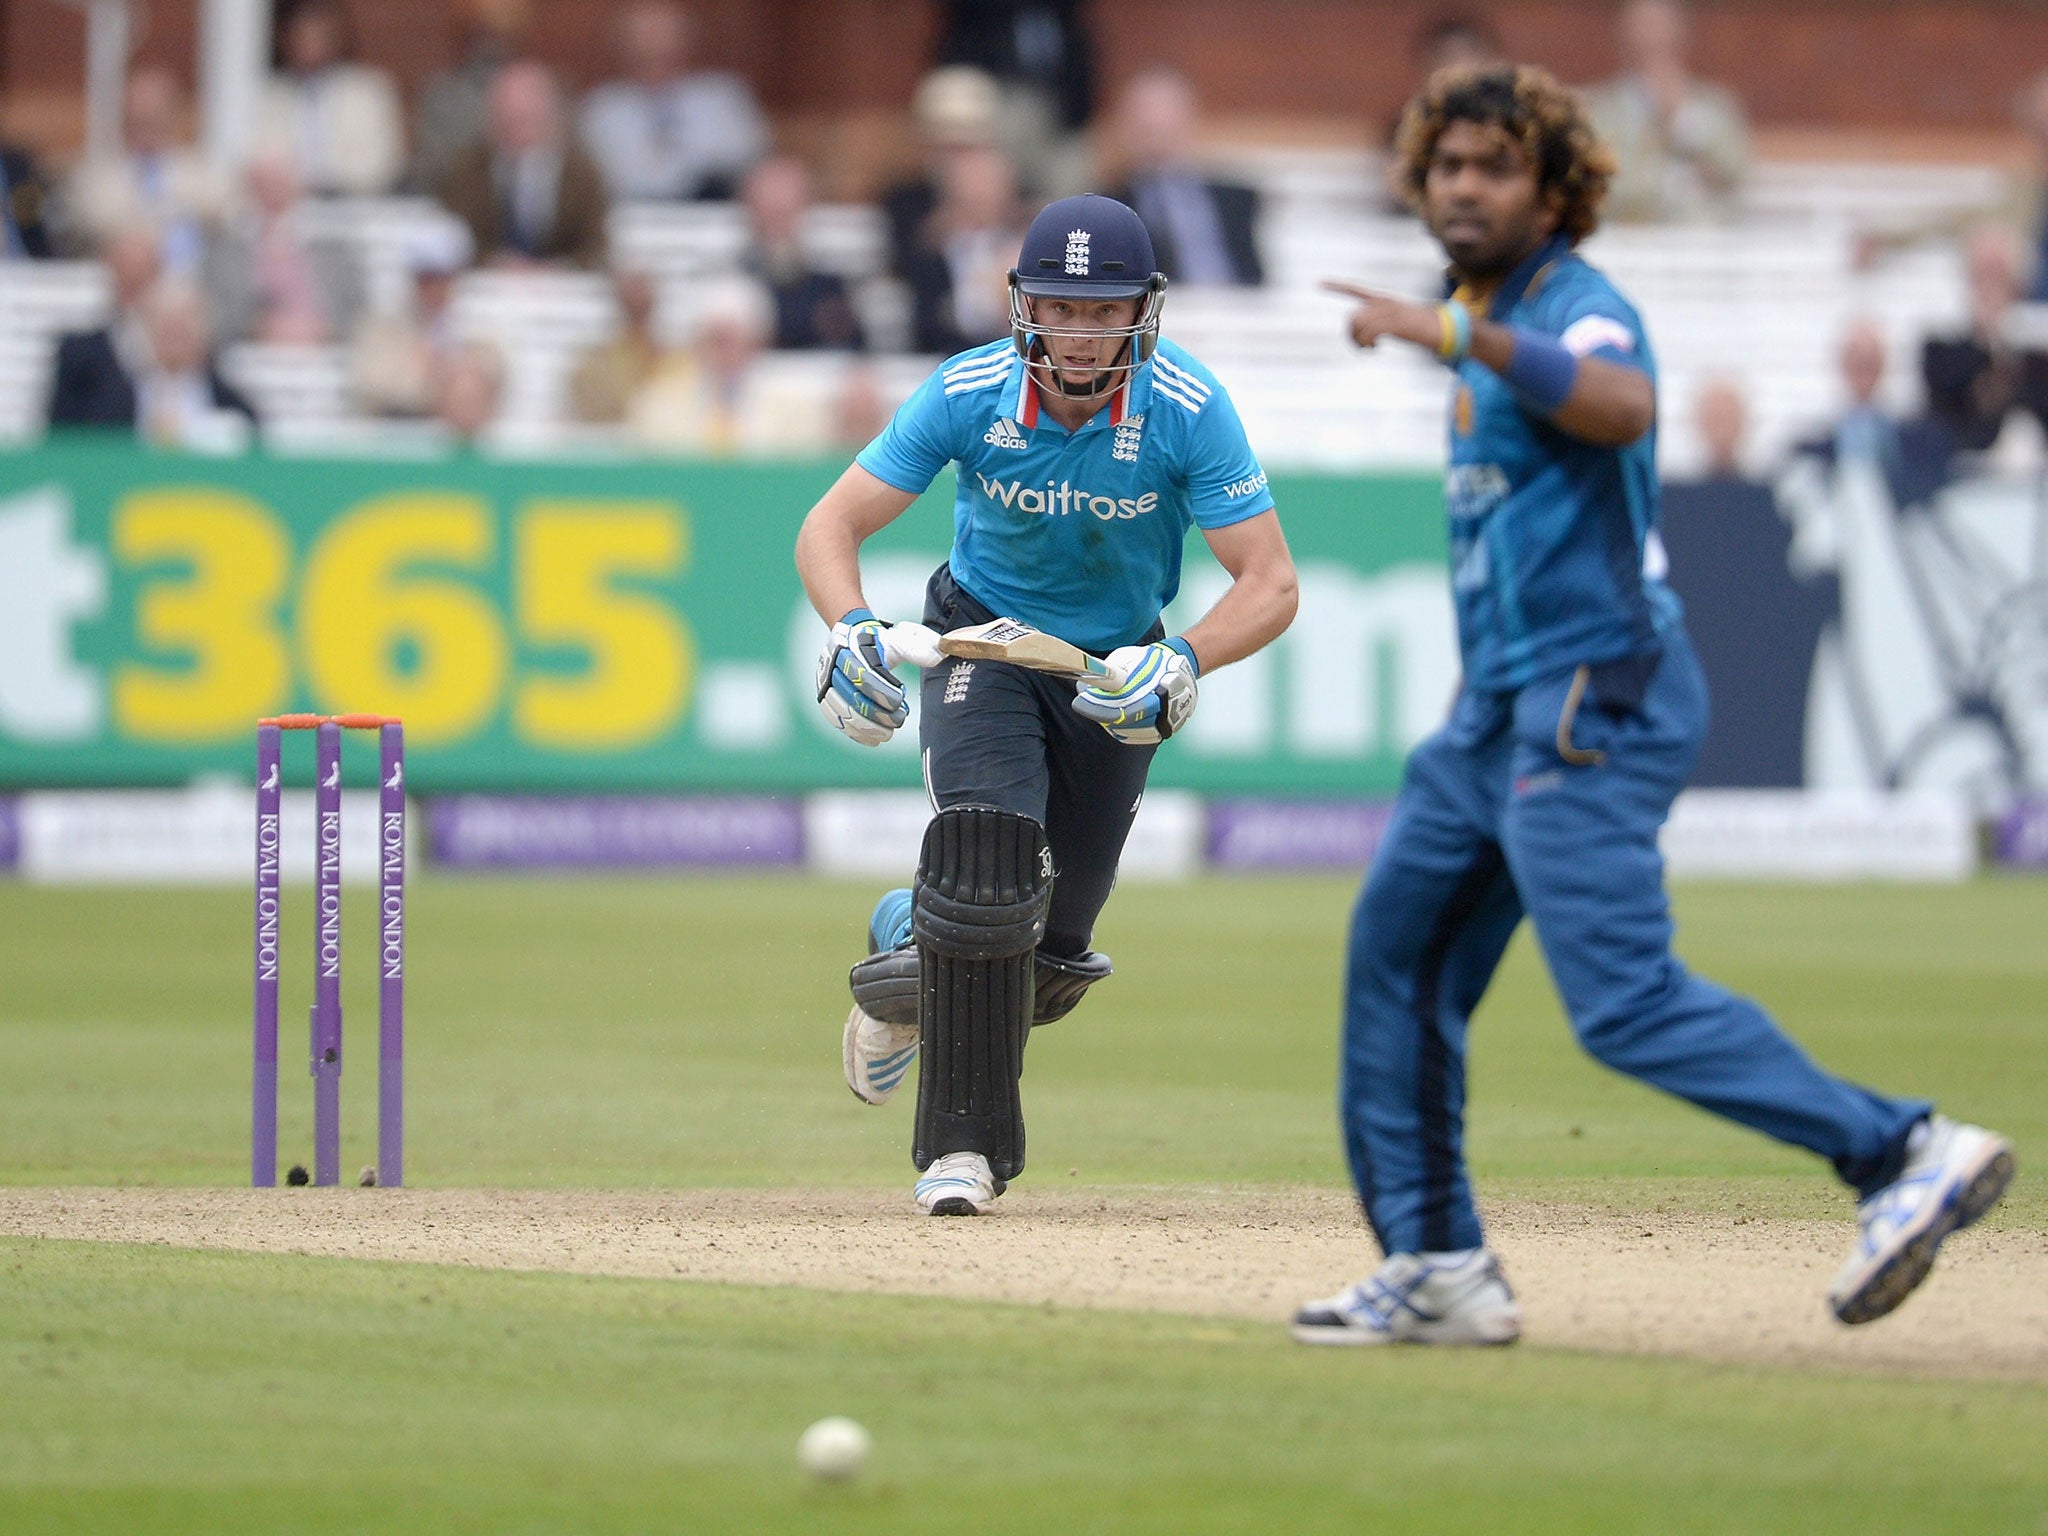 Jos Buttler of England on his way to a century during the 4th ODI match between England and Sri Lanka at Lord's